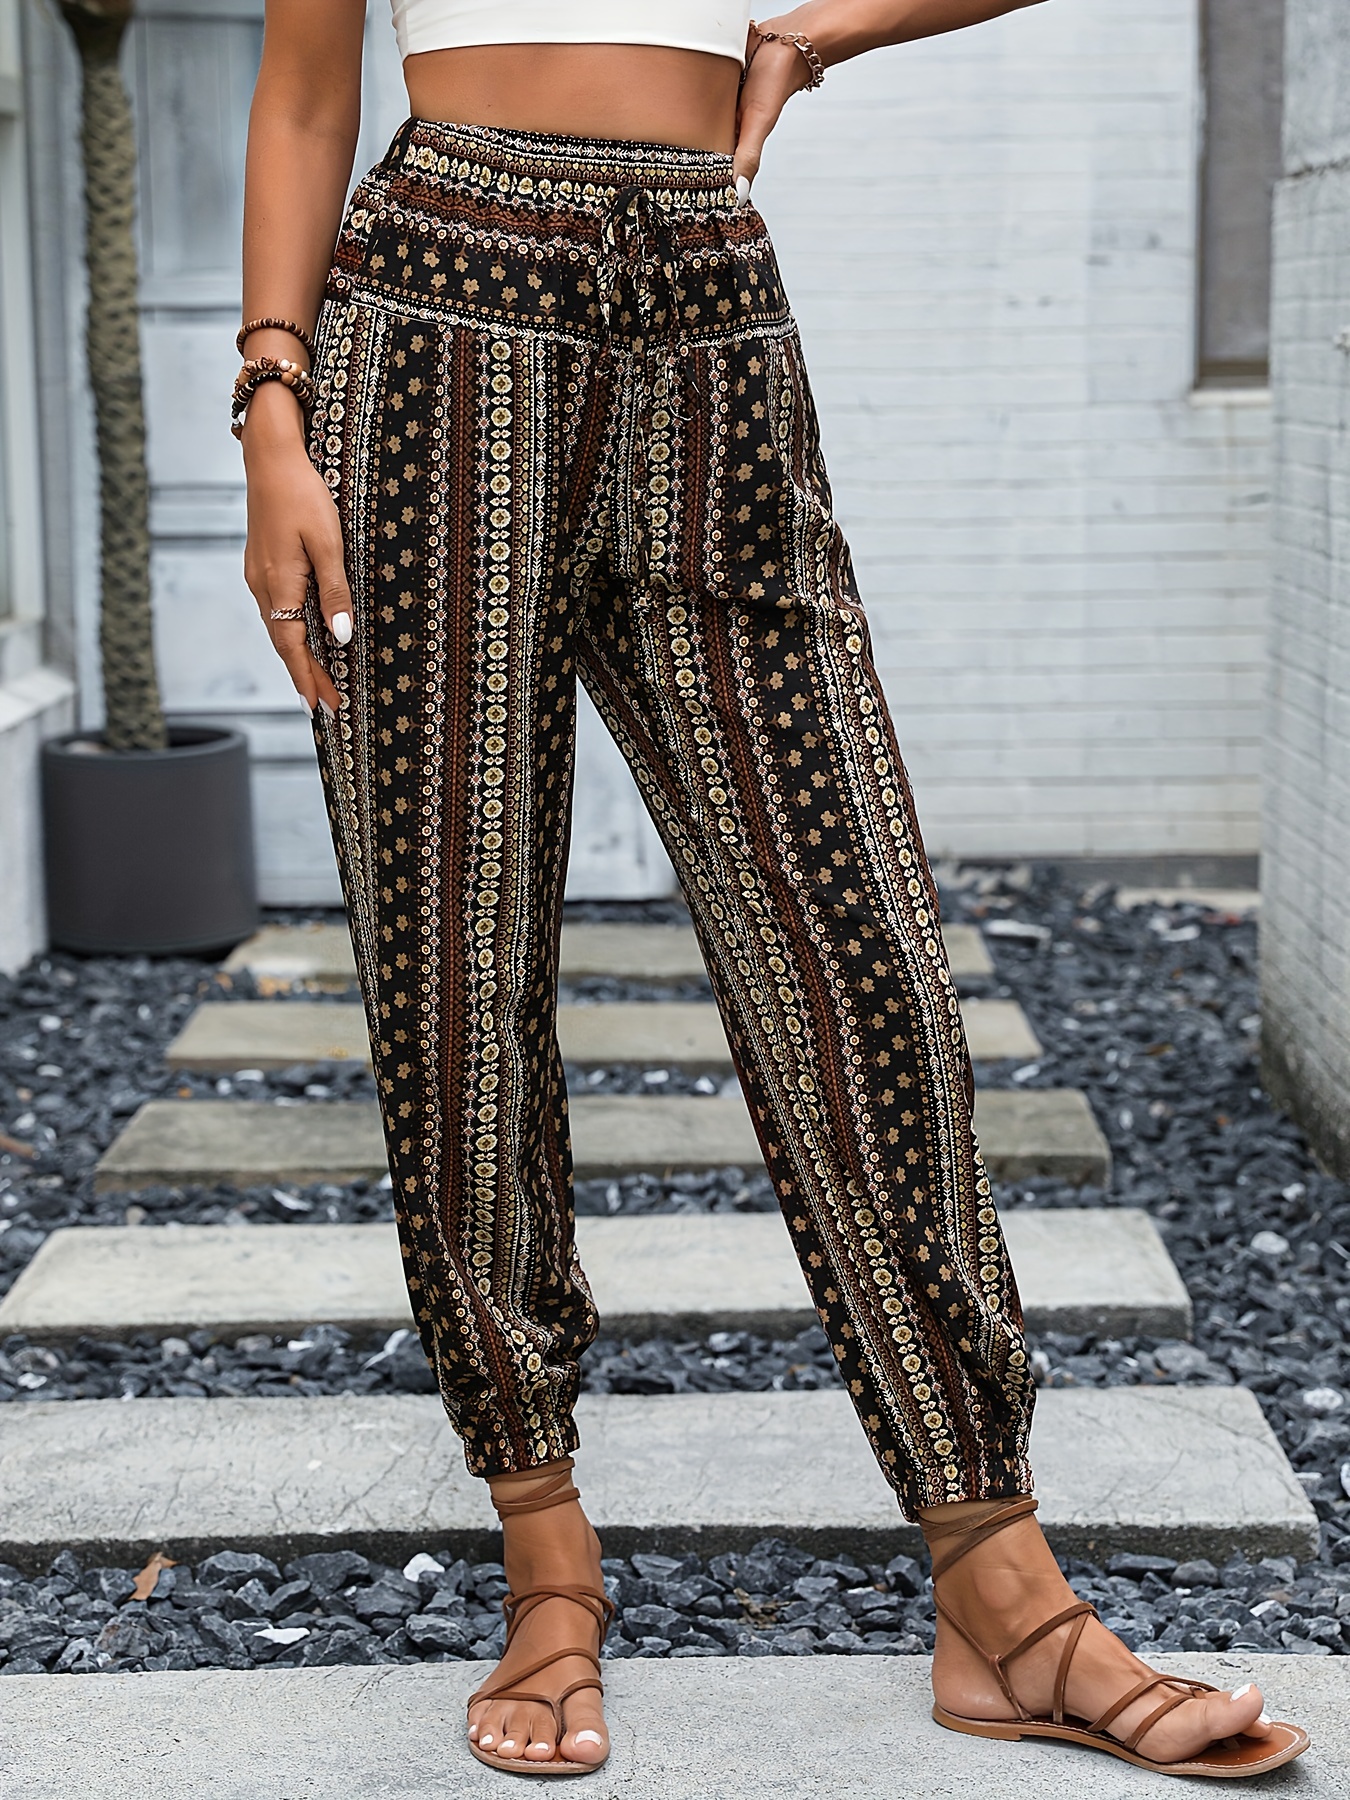 Tribal Brand Women's Clothing | Pants & Tops | Anthony's Florida